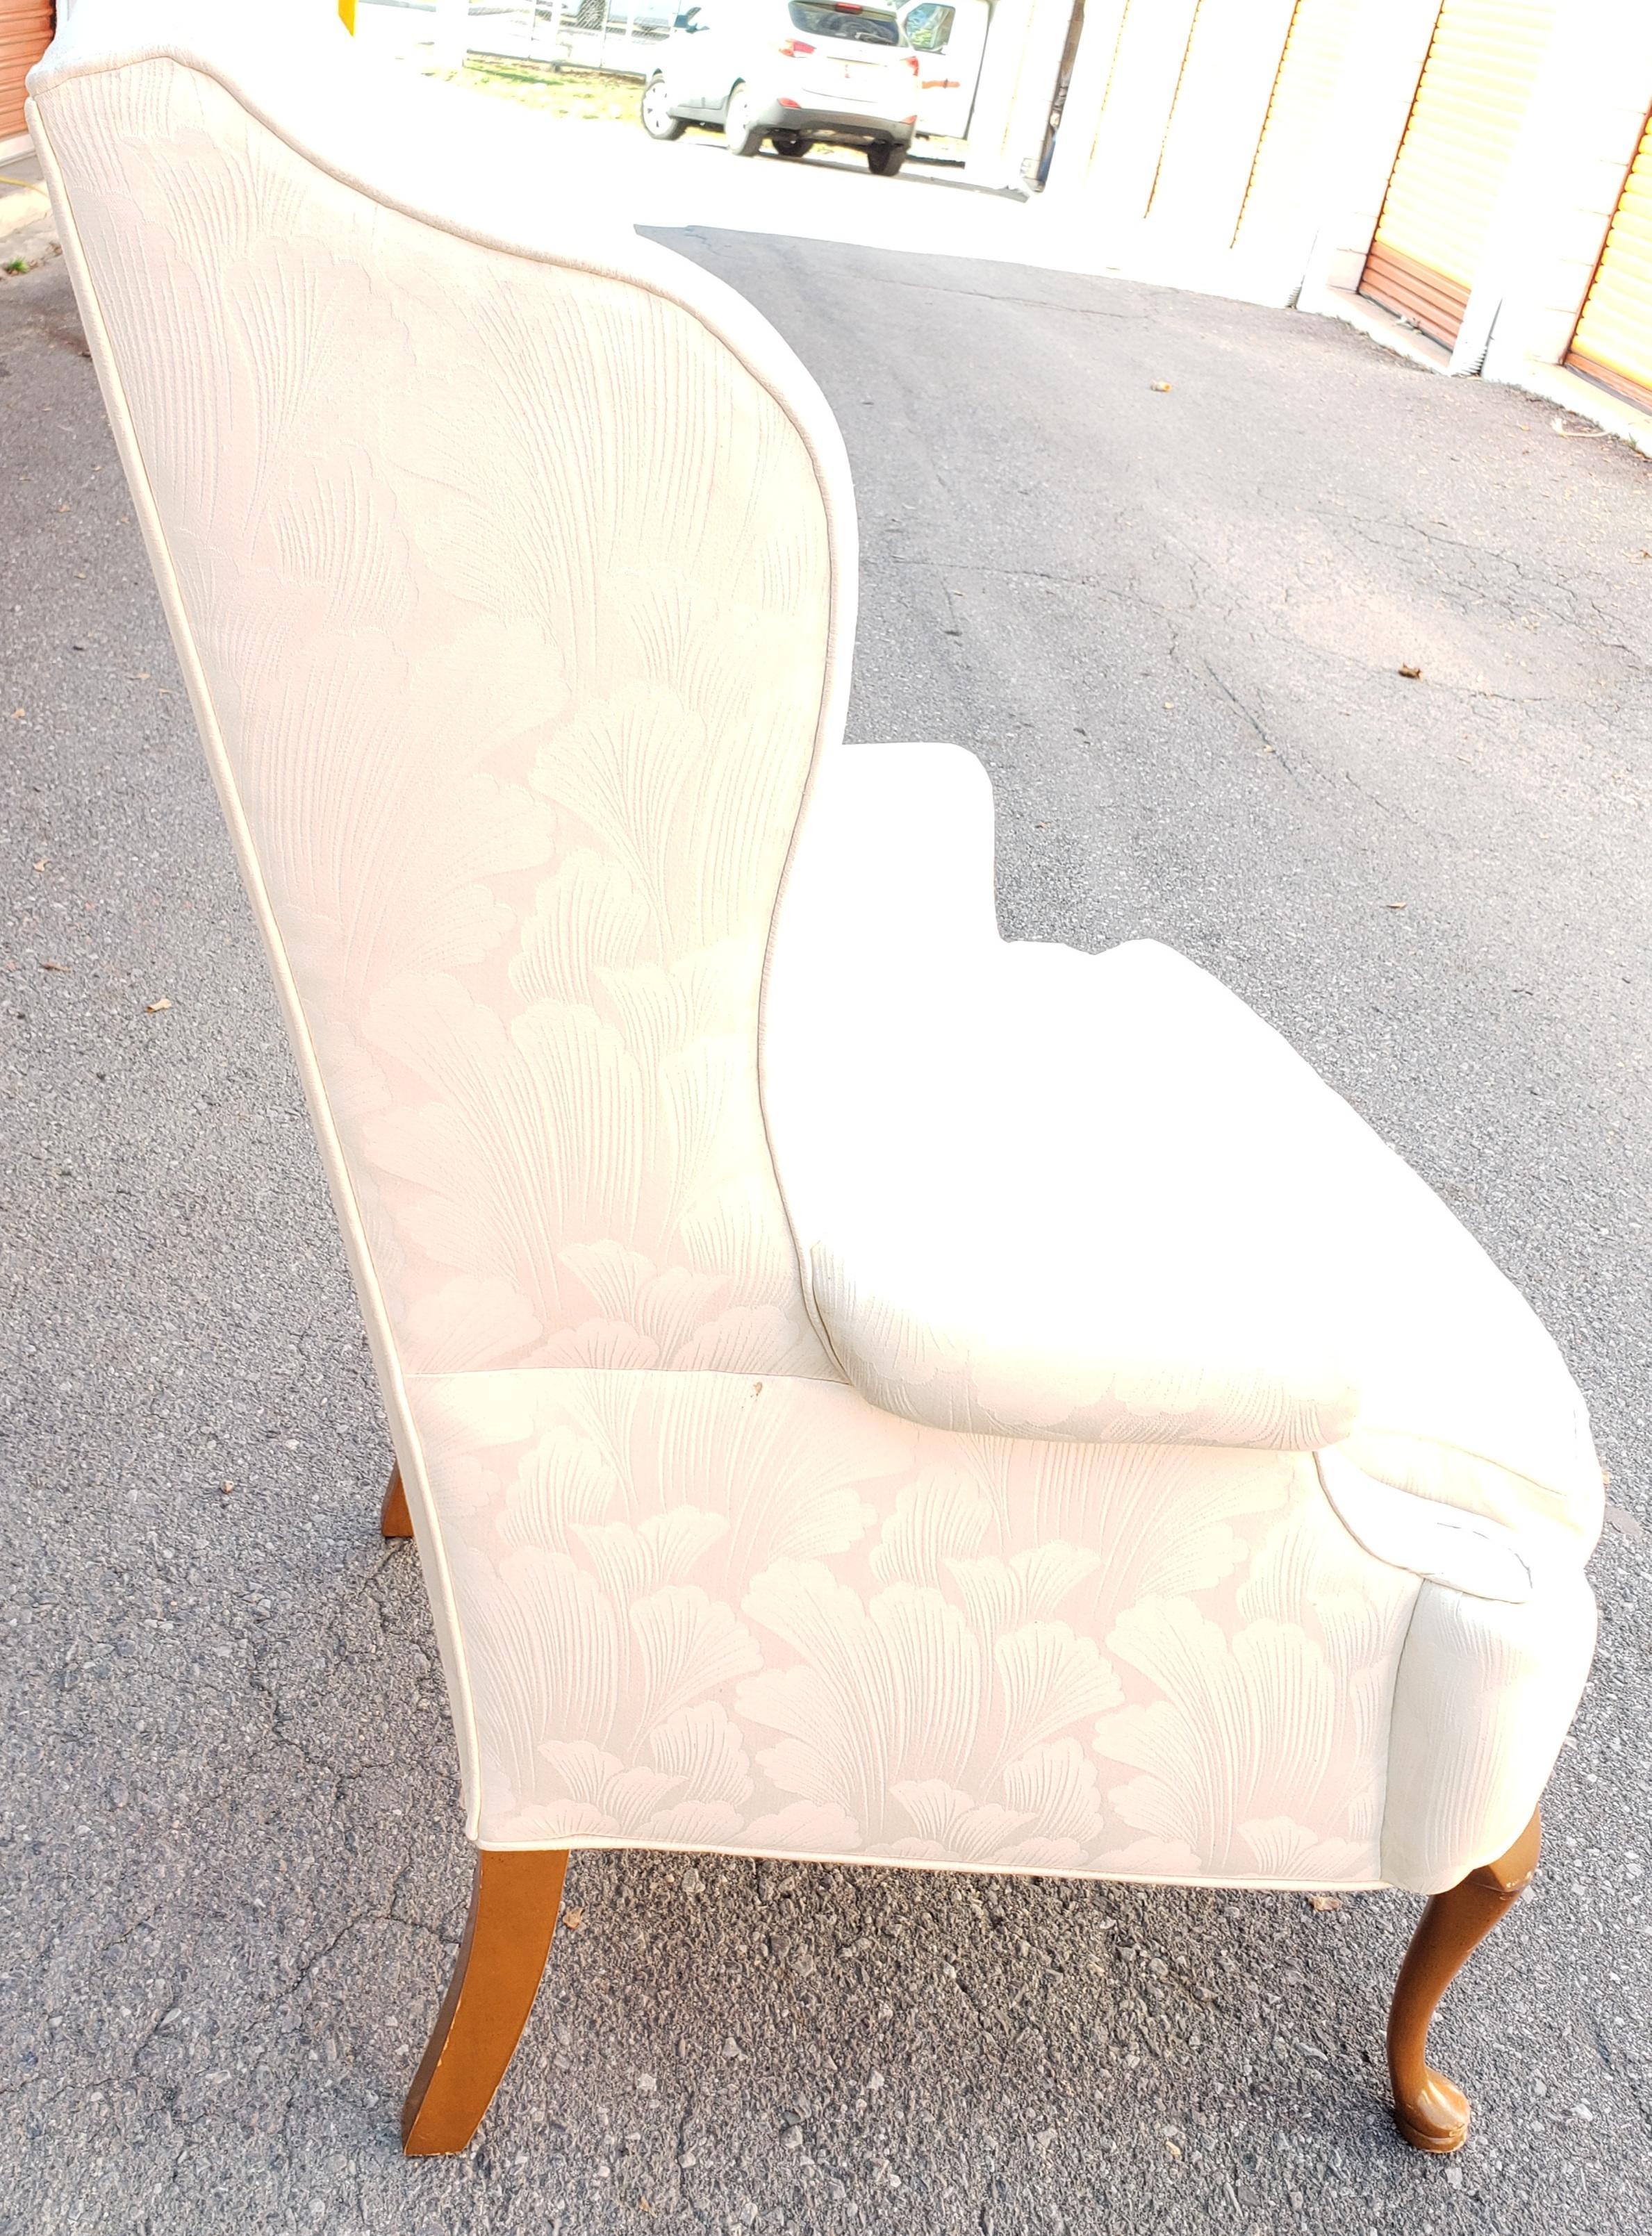 Upholstery 1970s Queen Anne Style Wing-Back Chairs in a Cream Swiss Floral Fabric, a Pair For Sale